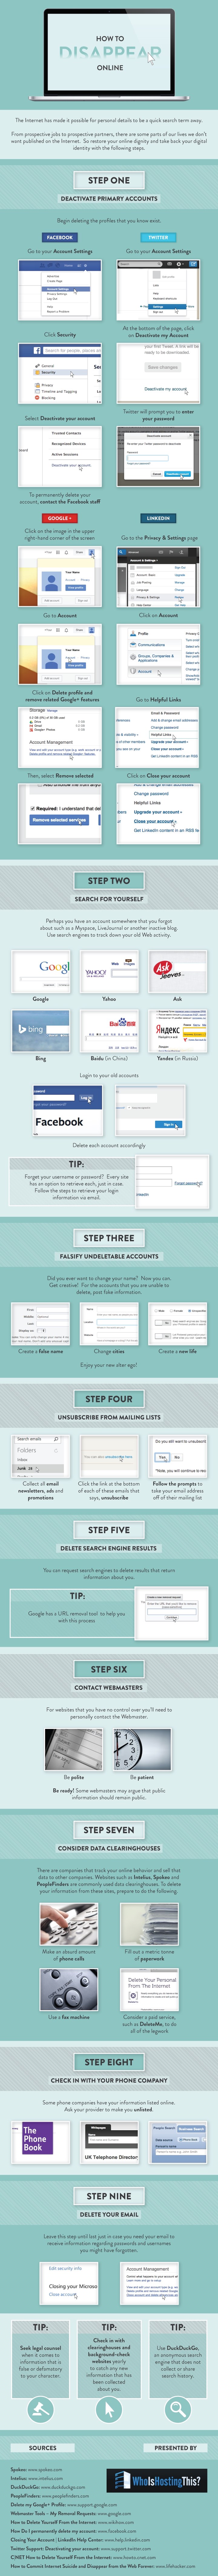 Make Yourself Disappear Online Completely in Just 9 Steps #Infographic